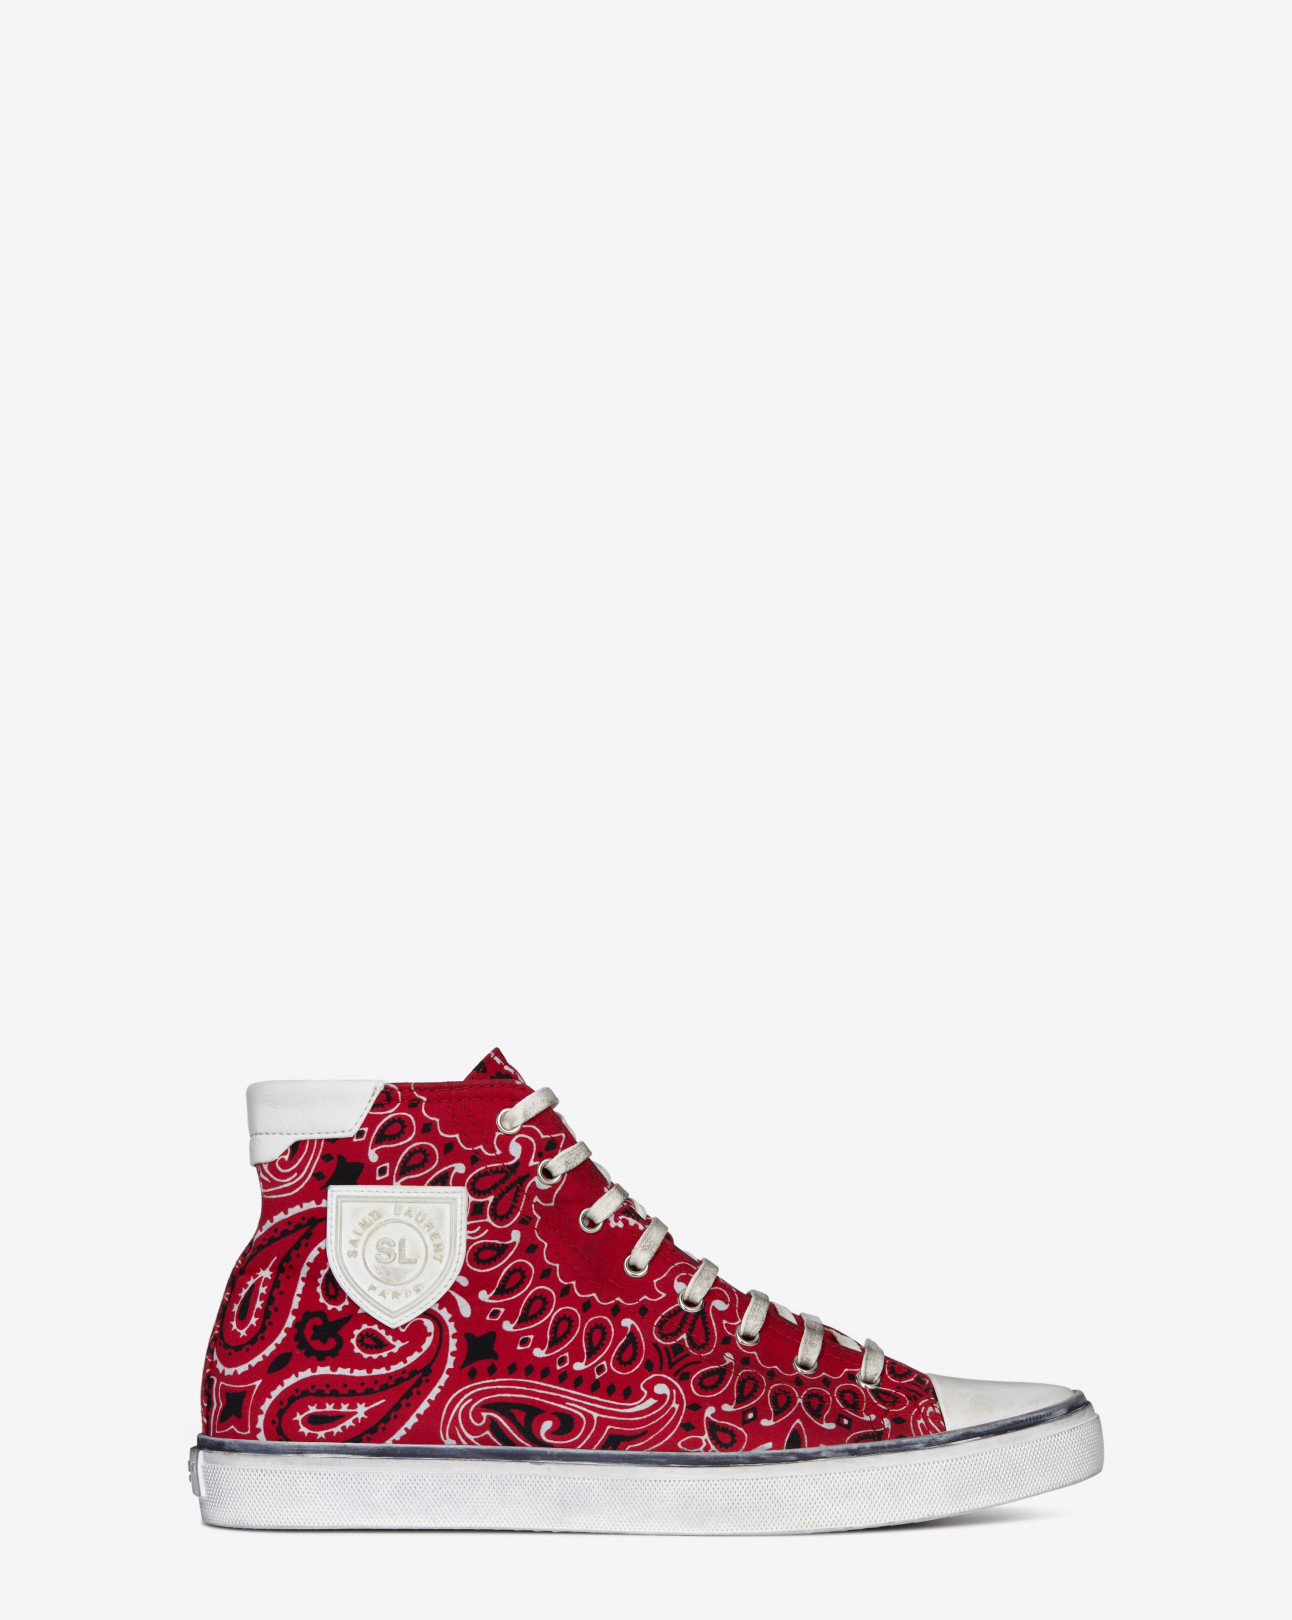 BEDFORD MID TOP SNEAKER IN RED BANDANA PRINTED CANVAS 10万円